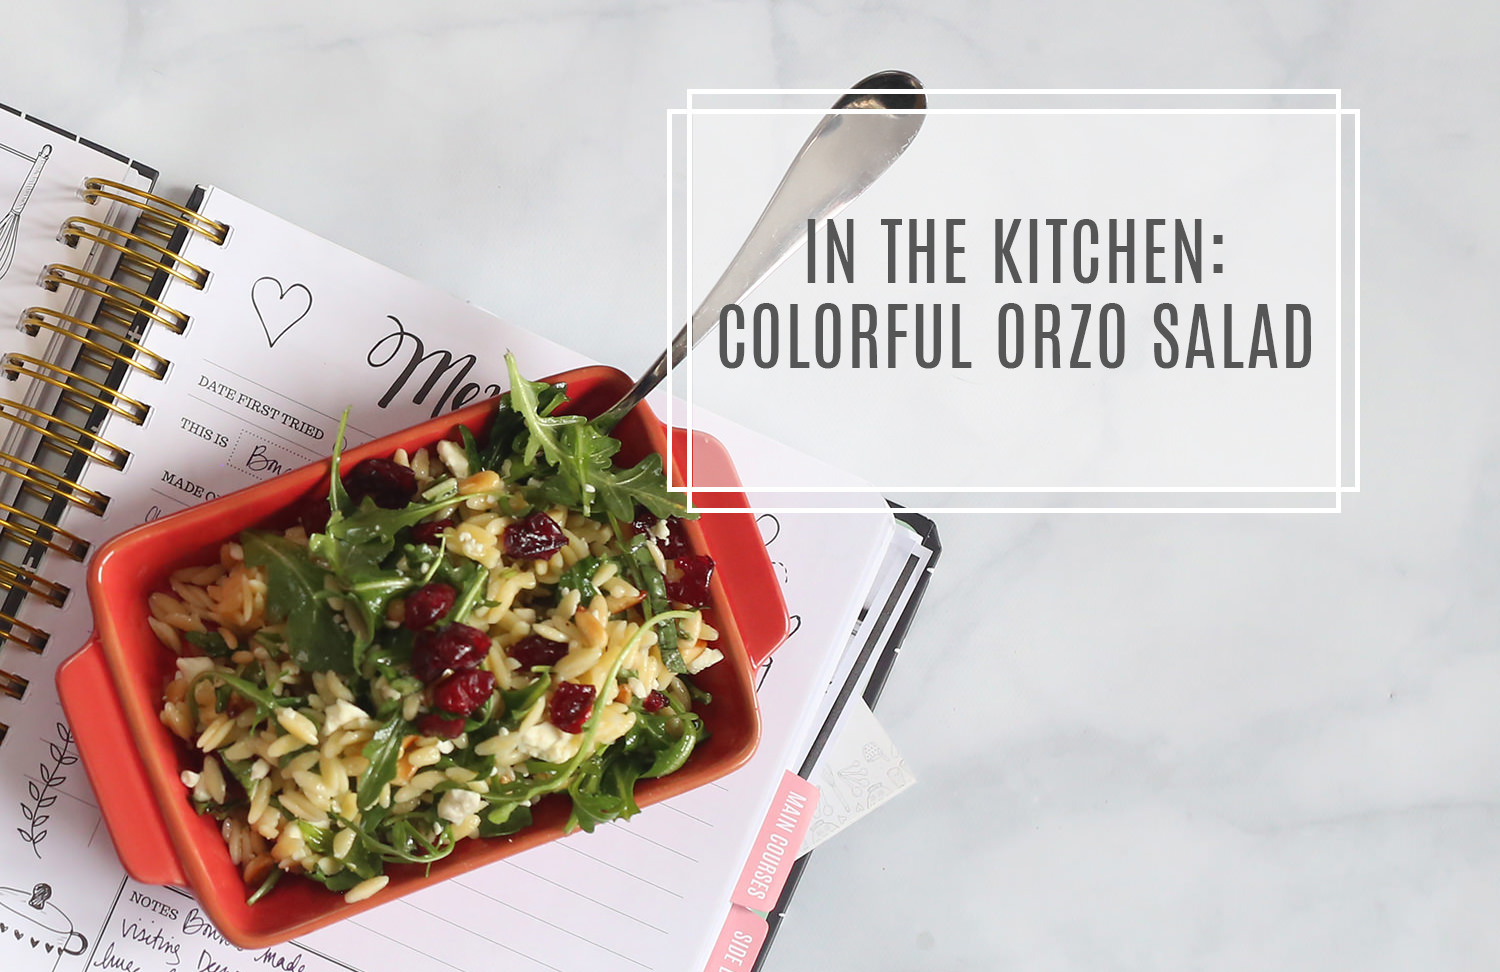 In the kitchen: a colorful orzo salad. Light and delicious, it's a healthy option for the new year!